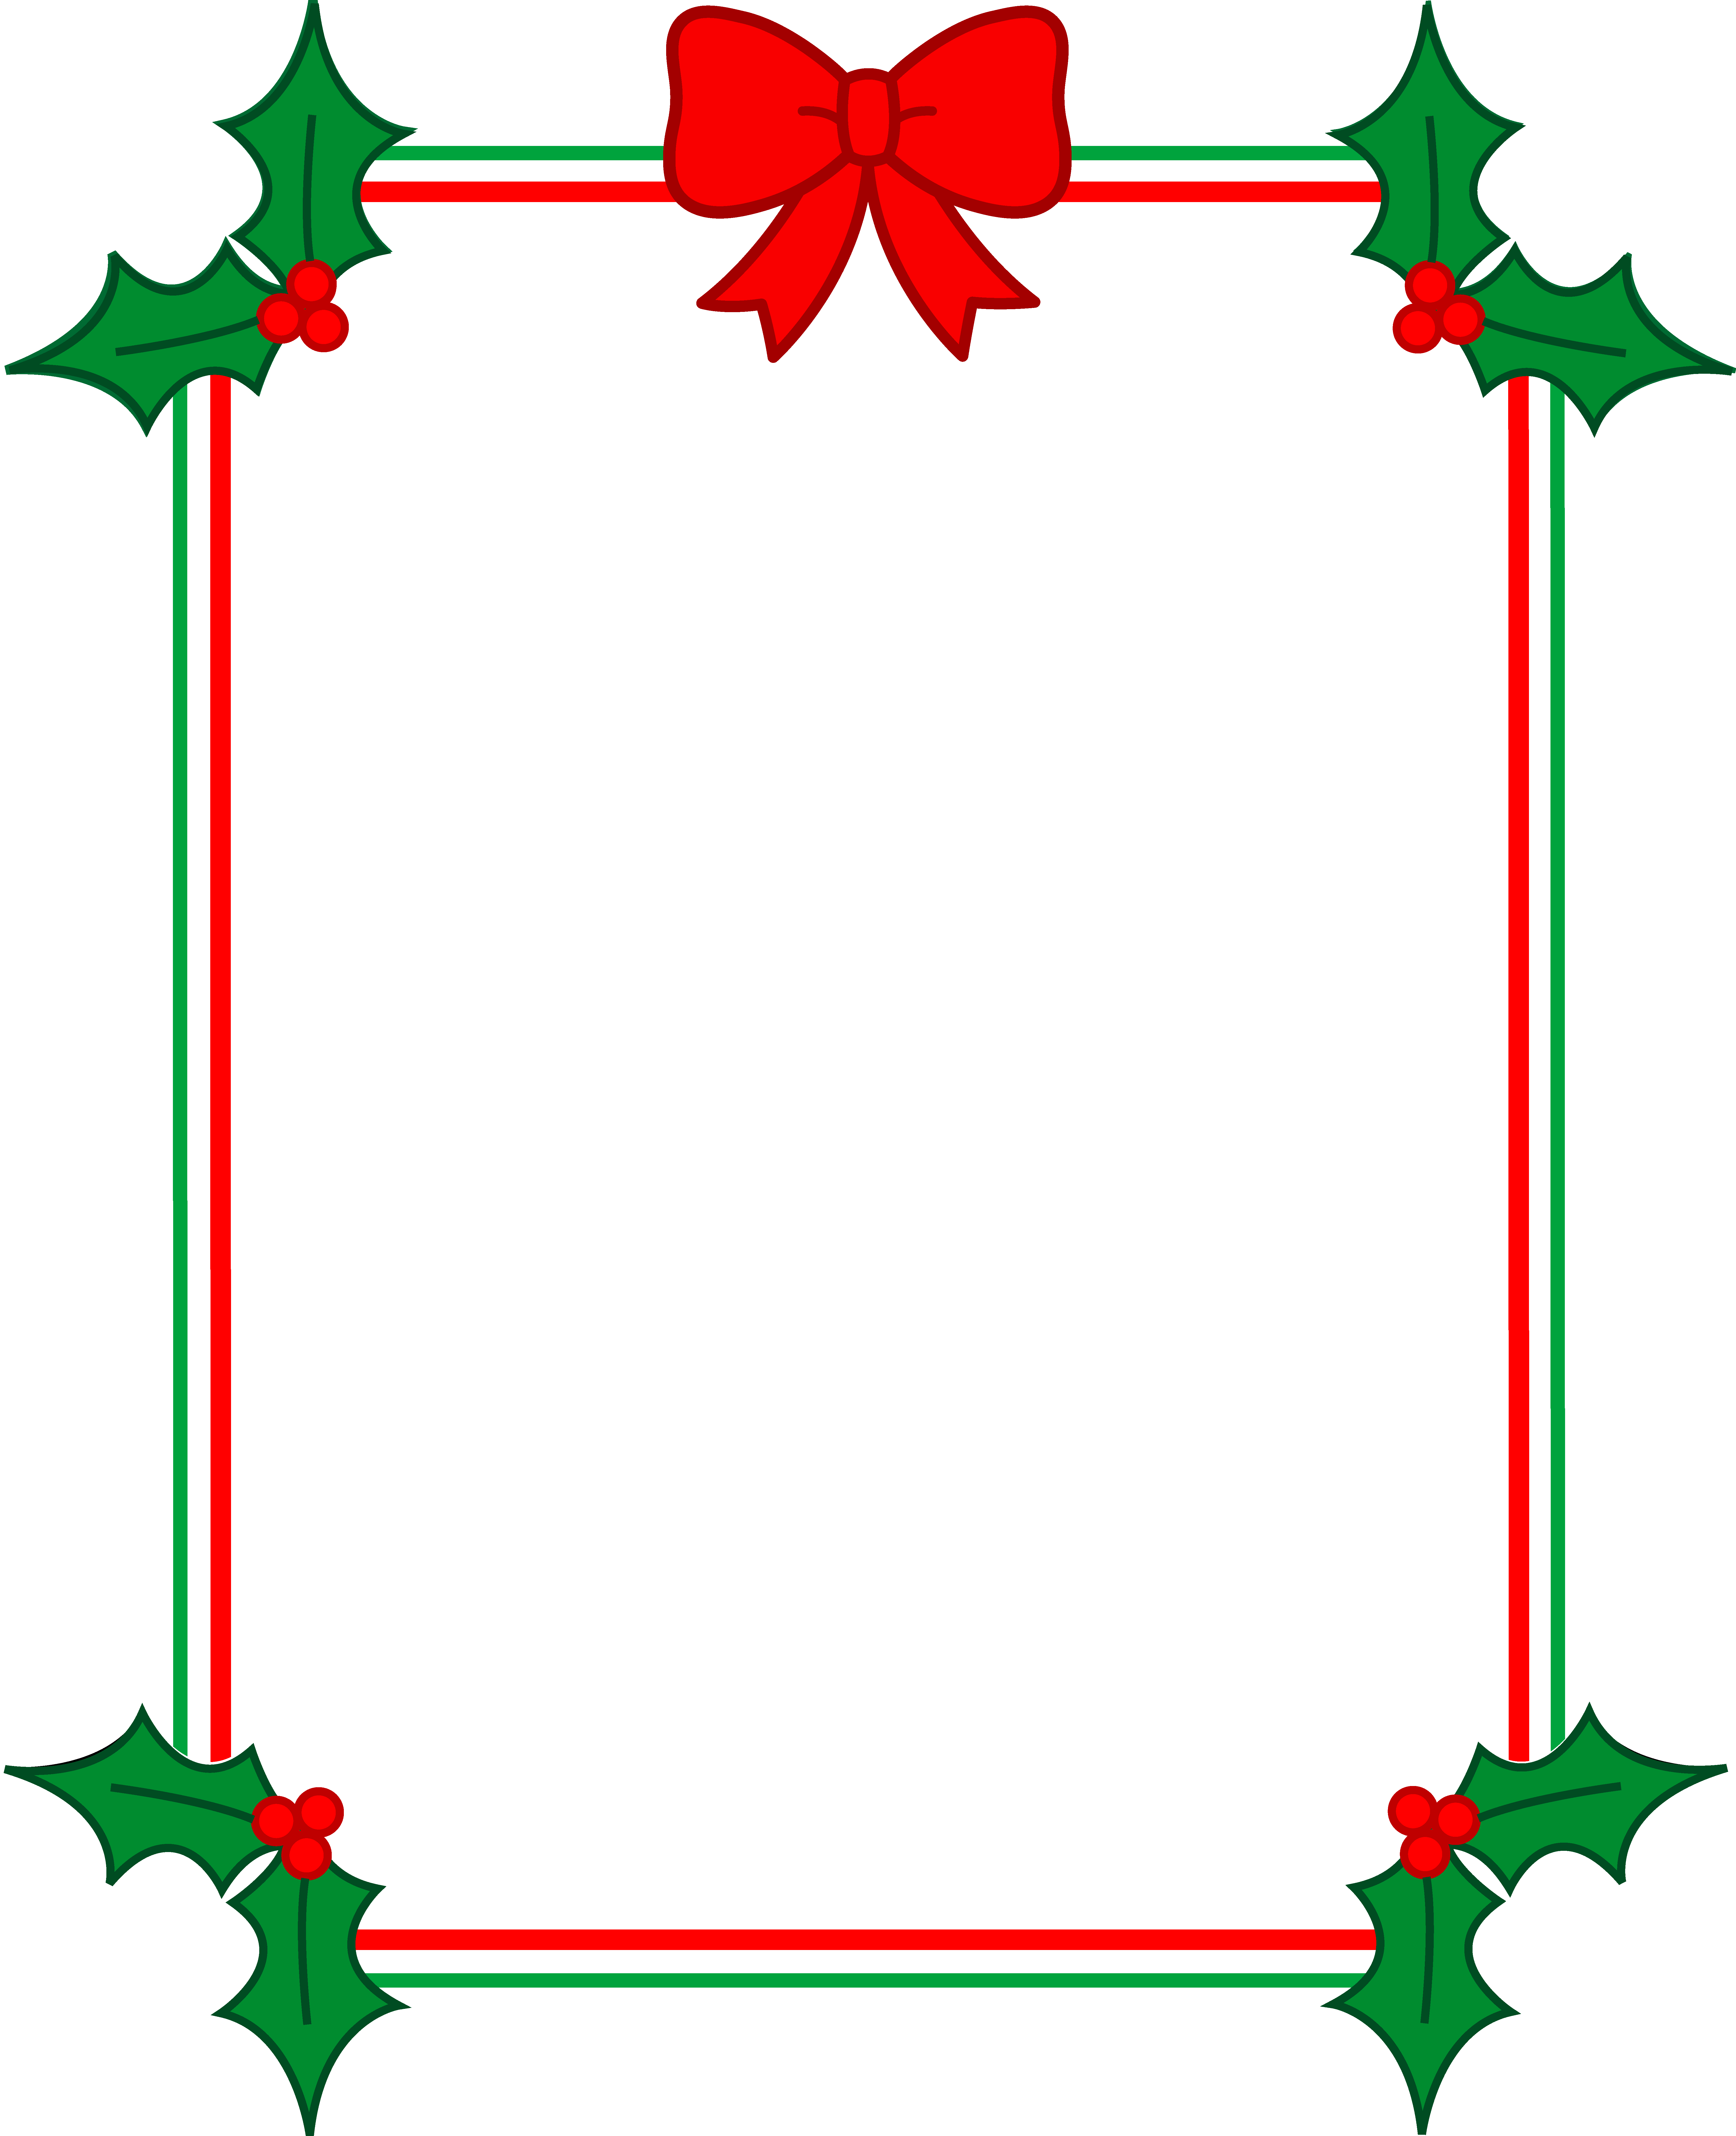 Christmas border with holly. Decorative clipart ribbon